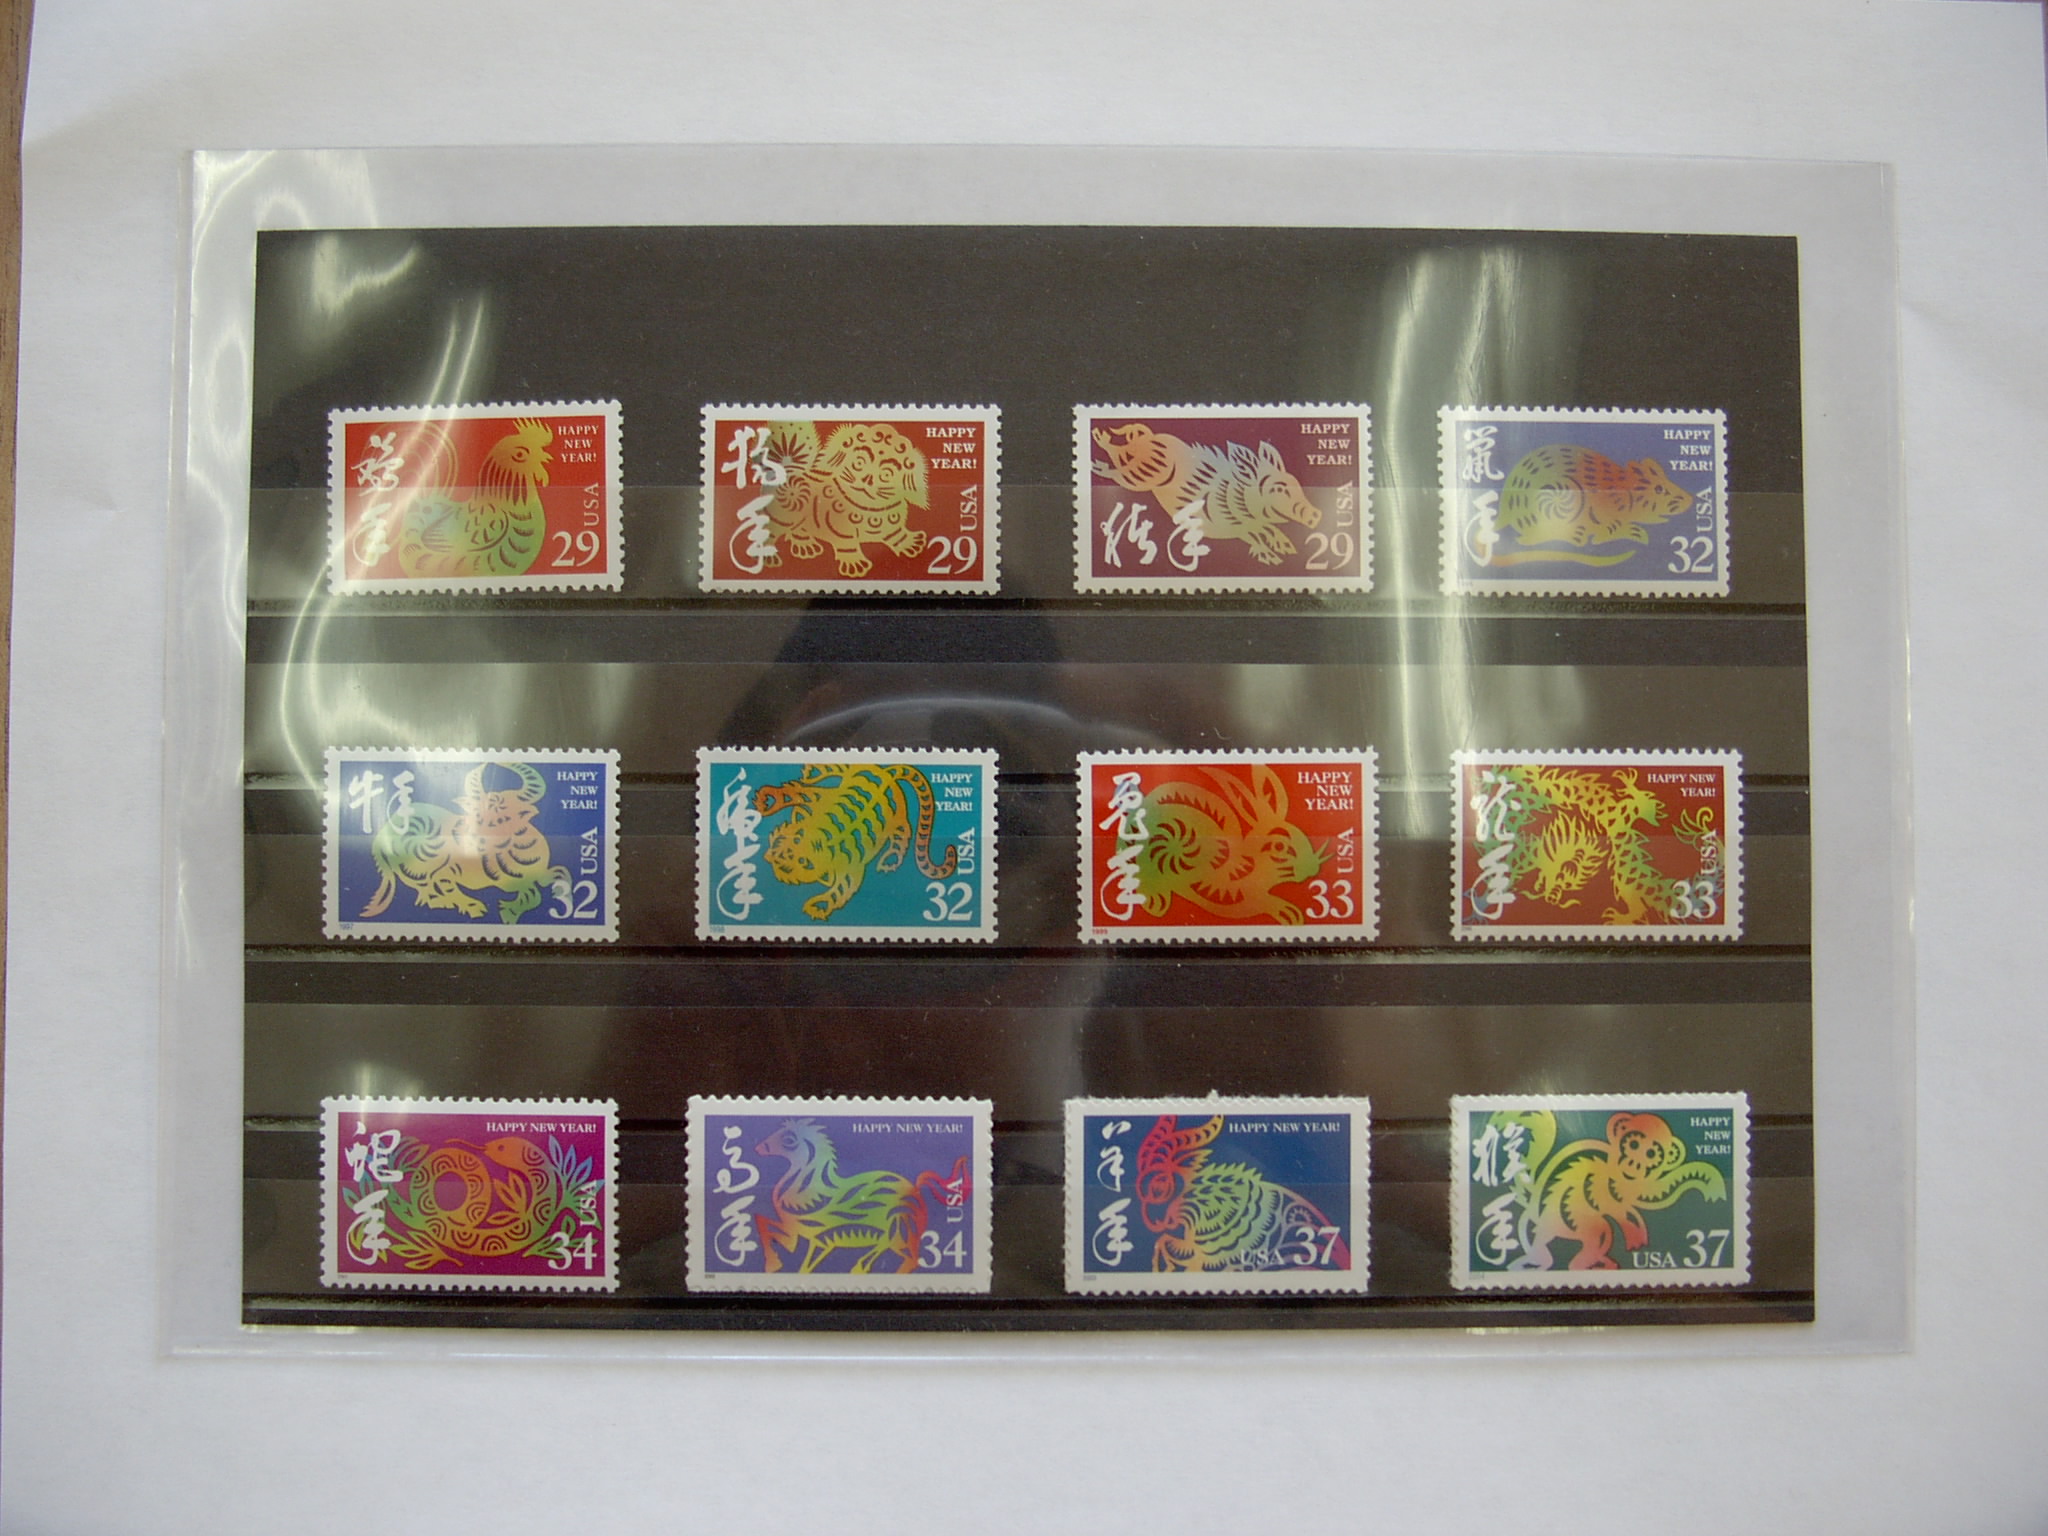 US Stamps(Chinese zodiac)